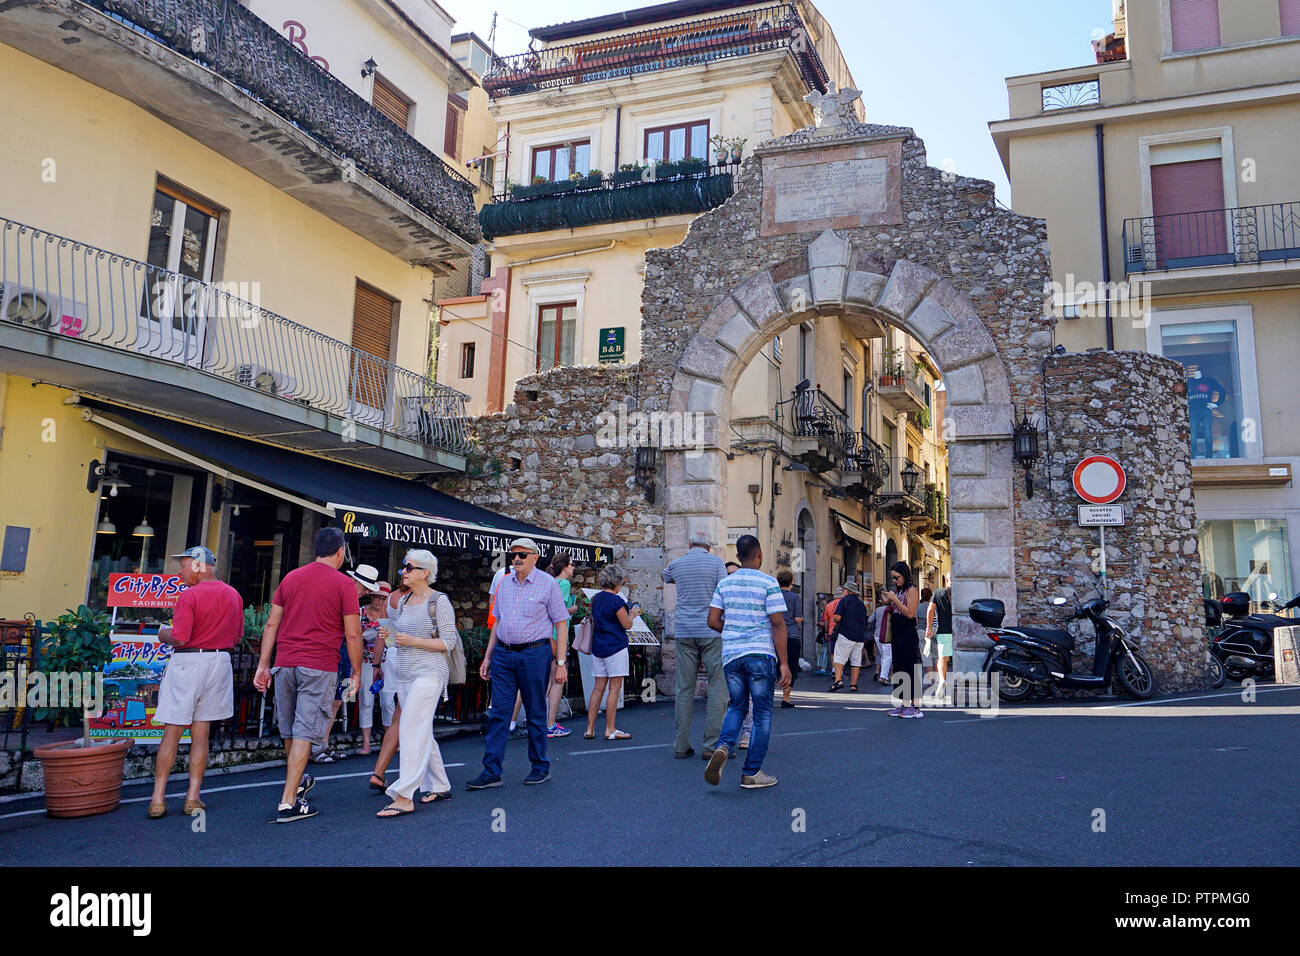 Porta Messina, north entrance of the historical center, old town of Taormina, Sicily, Italy Stock Photo